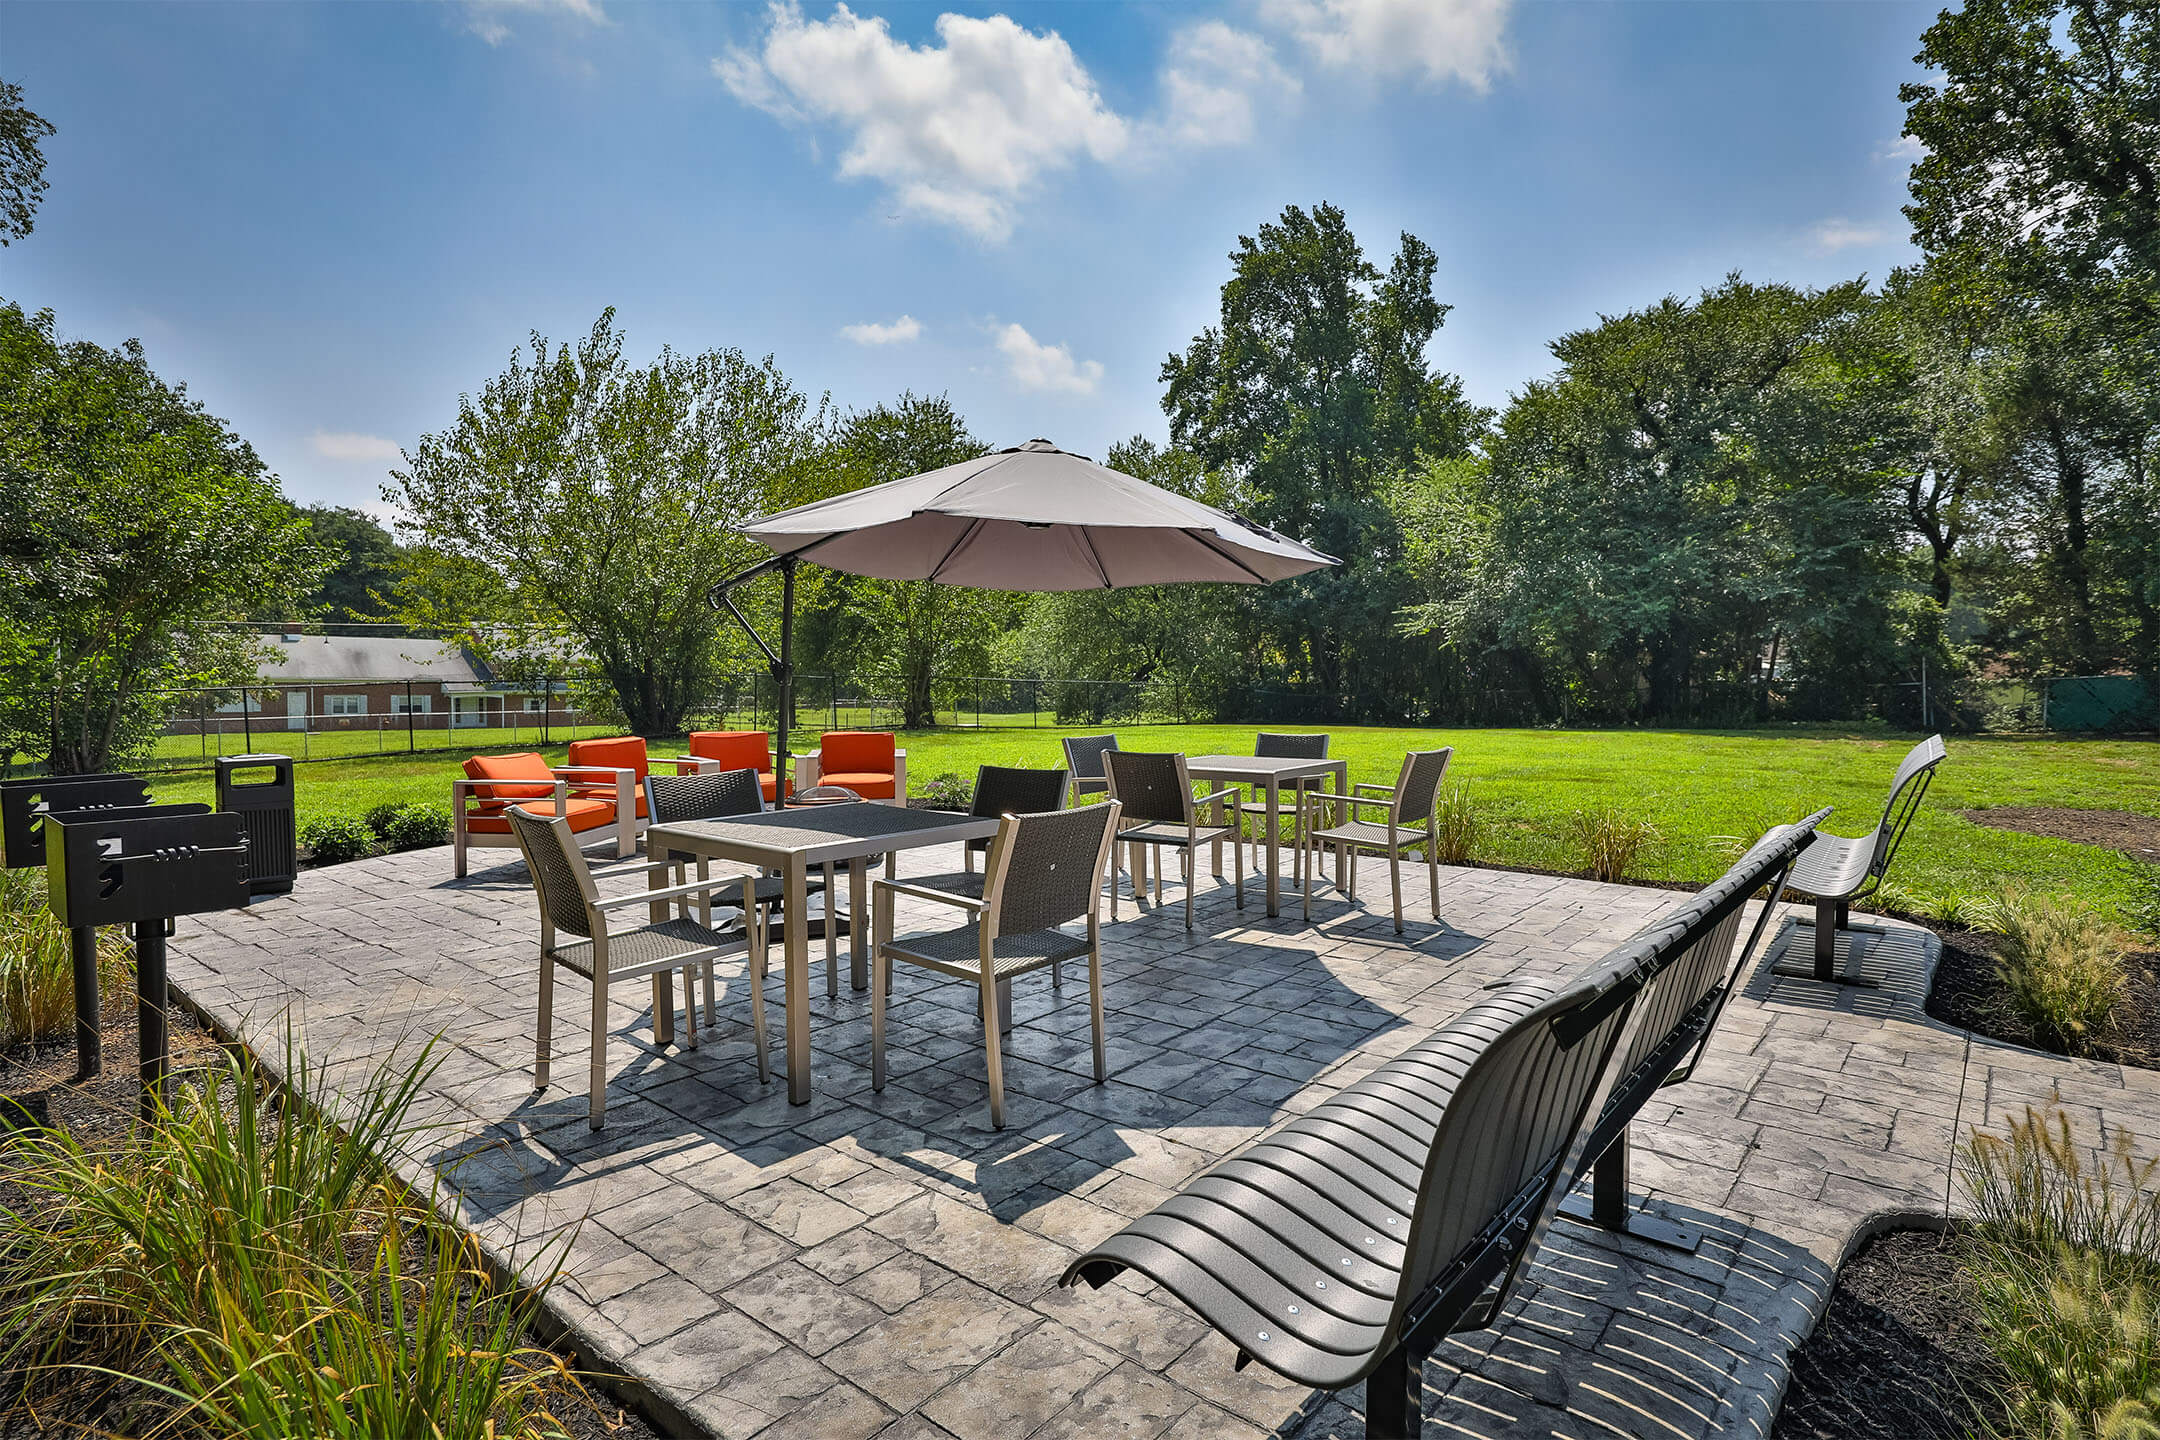 Outdoor seating at Parc at Cherry Hill, Cherry Hill, New Jersey